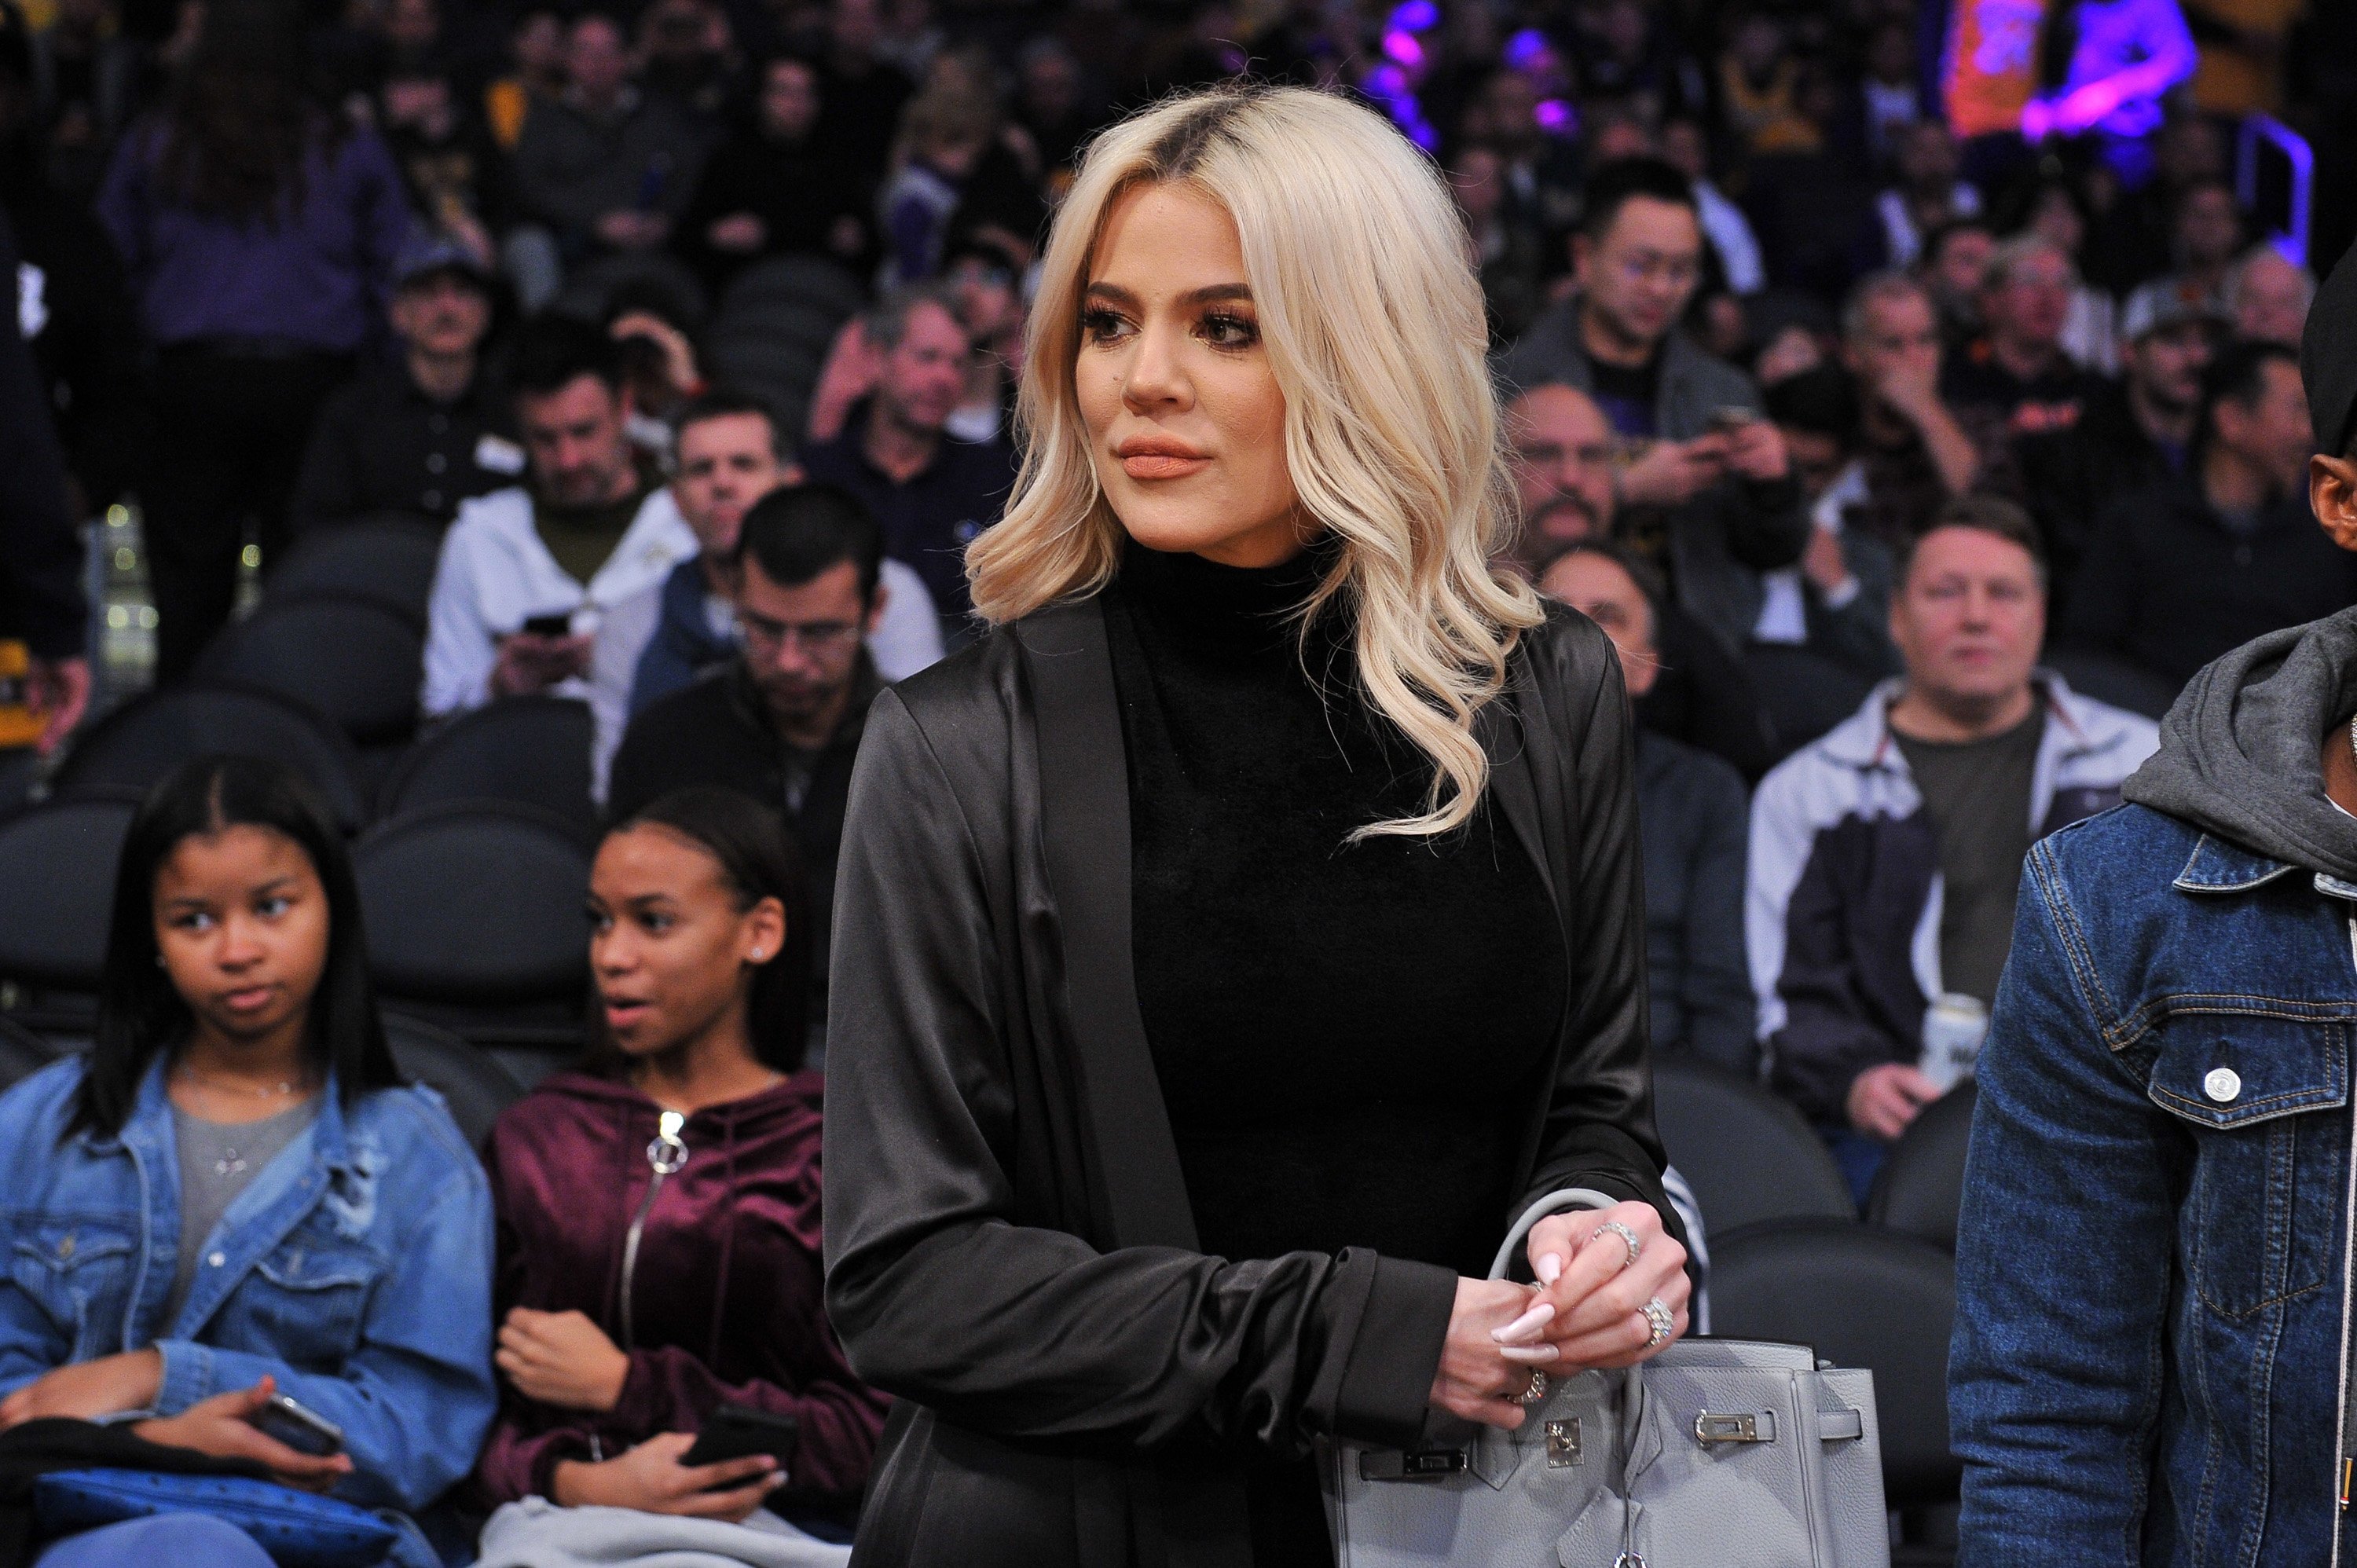 Khloe Kardashian at a basketball game between the Los Angeles Lakers and the Cleveland Cavaliers on January 13, 2019, in California. | Source: Getty Images